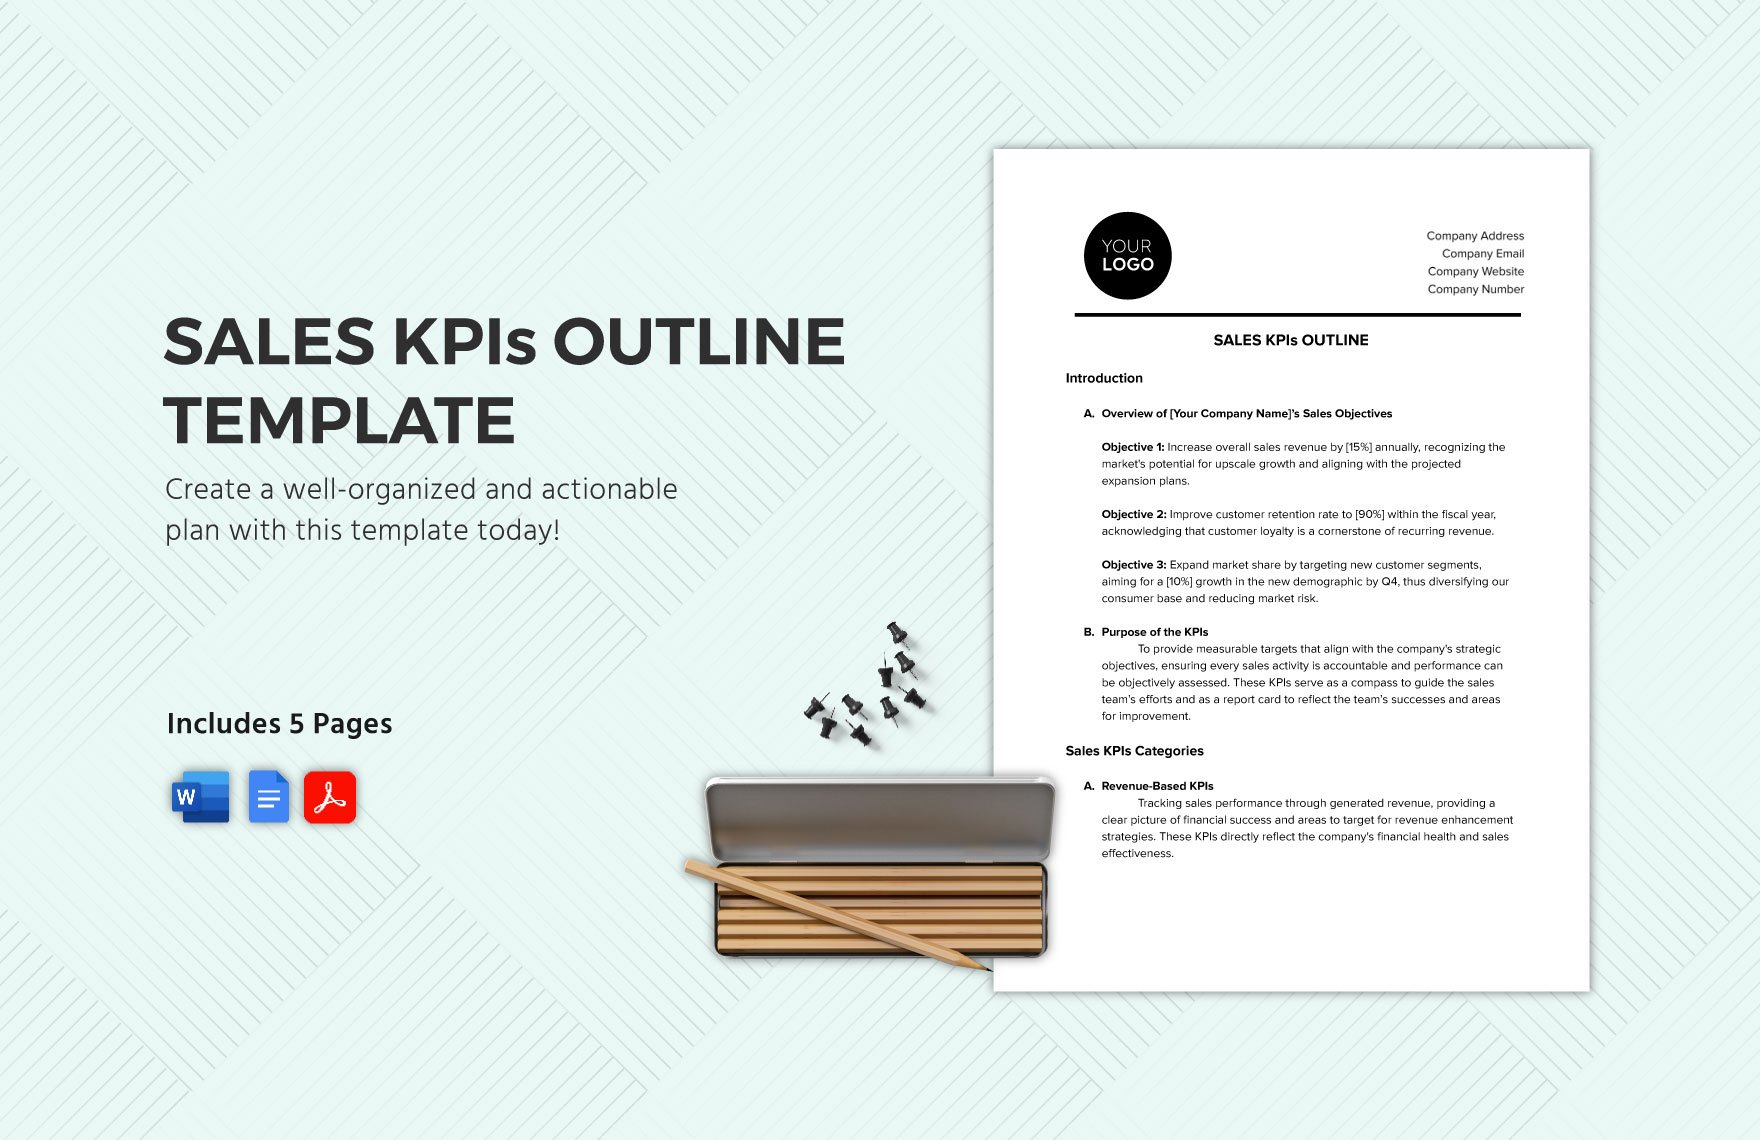 Sales KPIs Outline Template